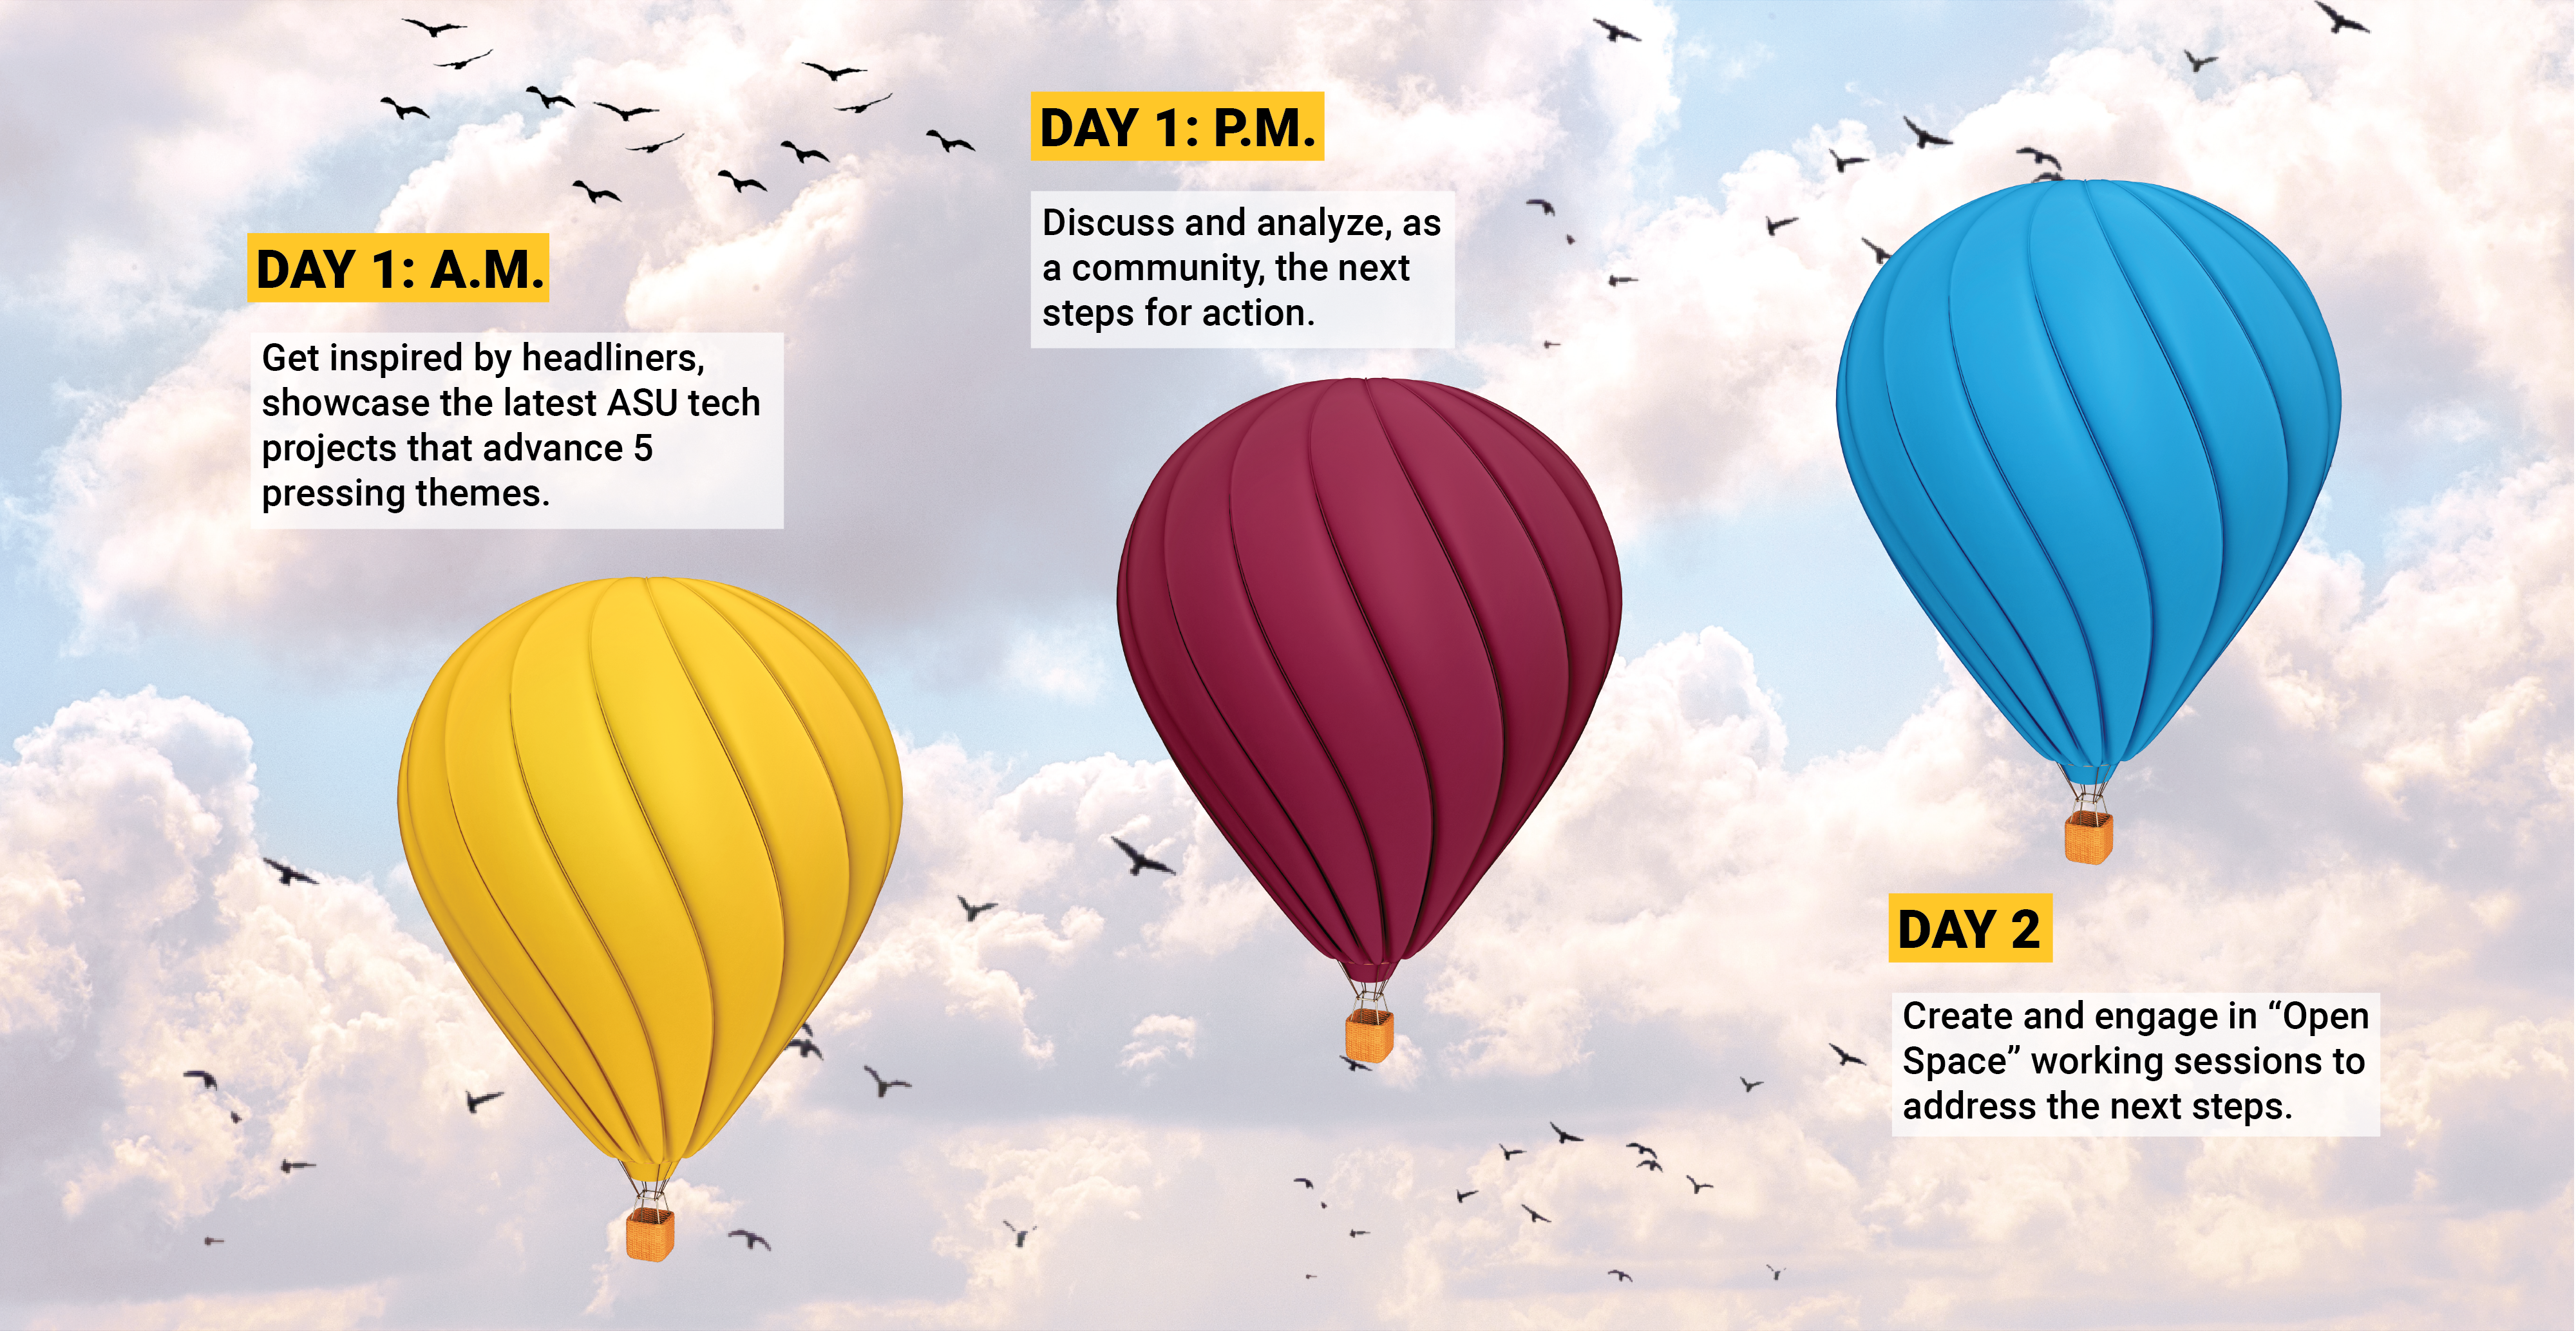 three balloons floating with clouds and birds. Describe the outputs of the days